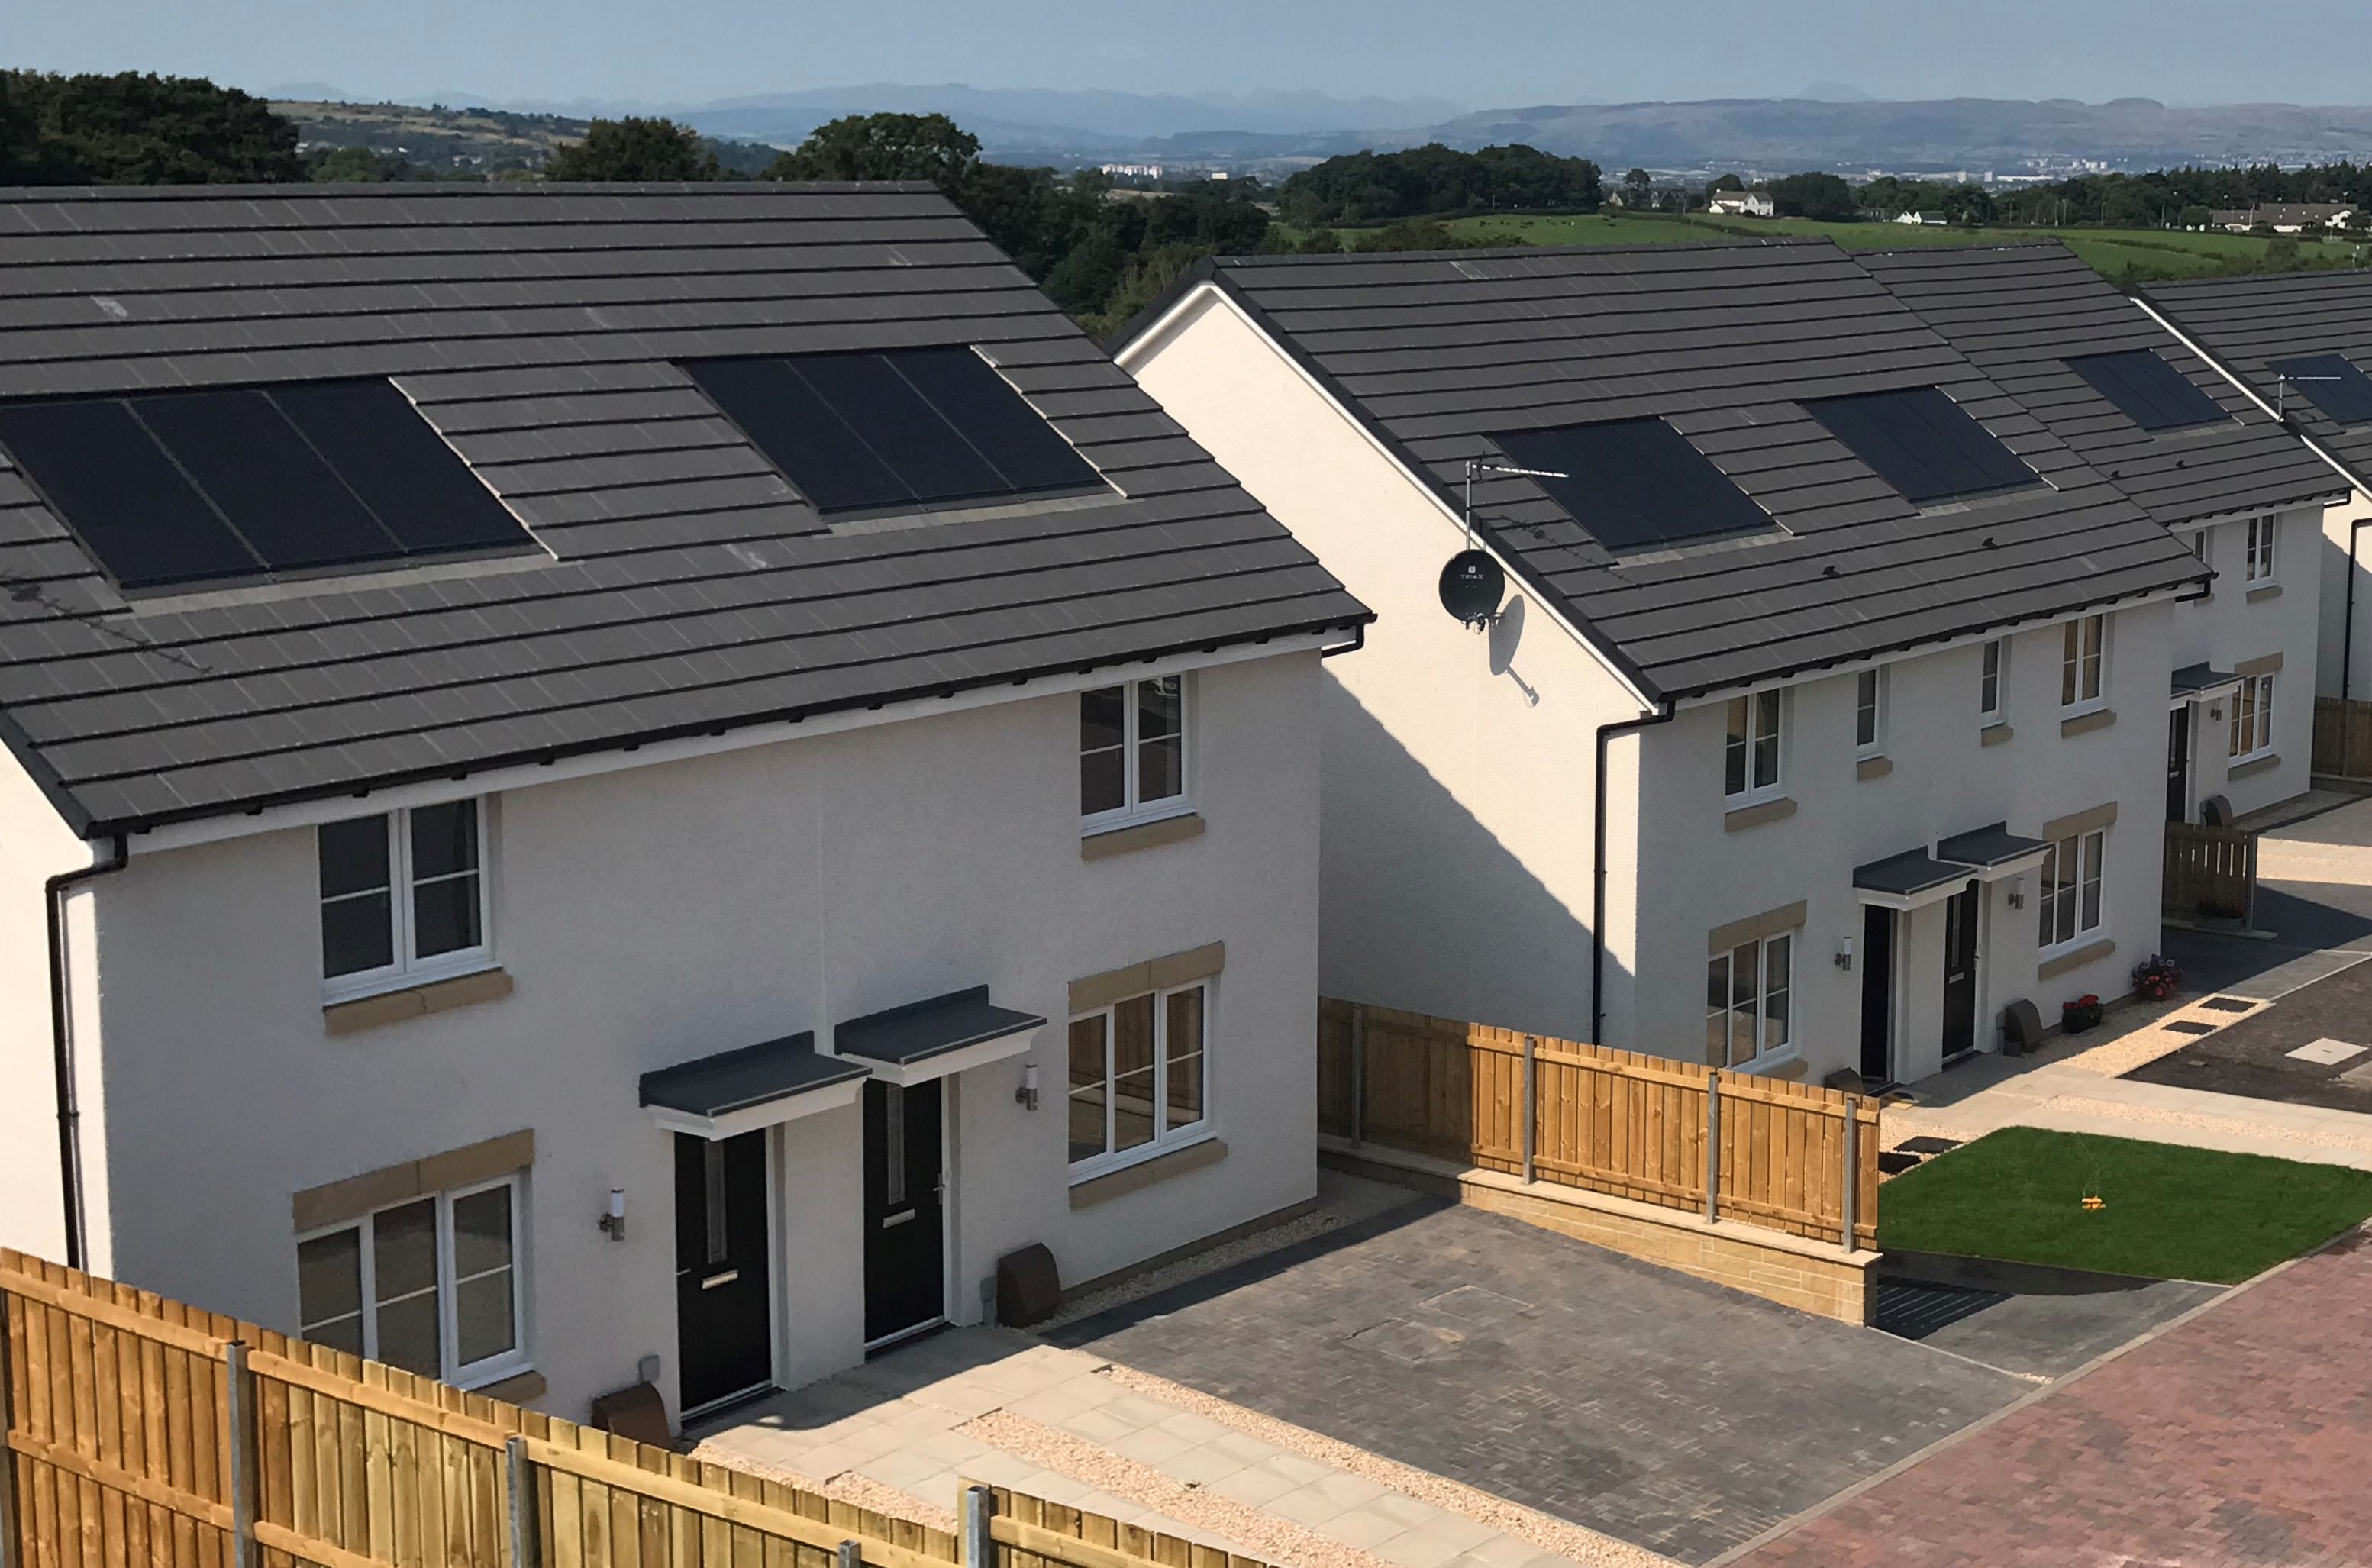 Sanctuary Scotland delivers 42 affordable homes in Newton Mearns